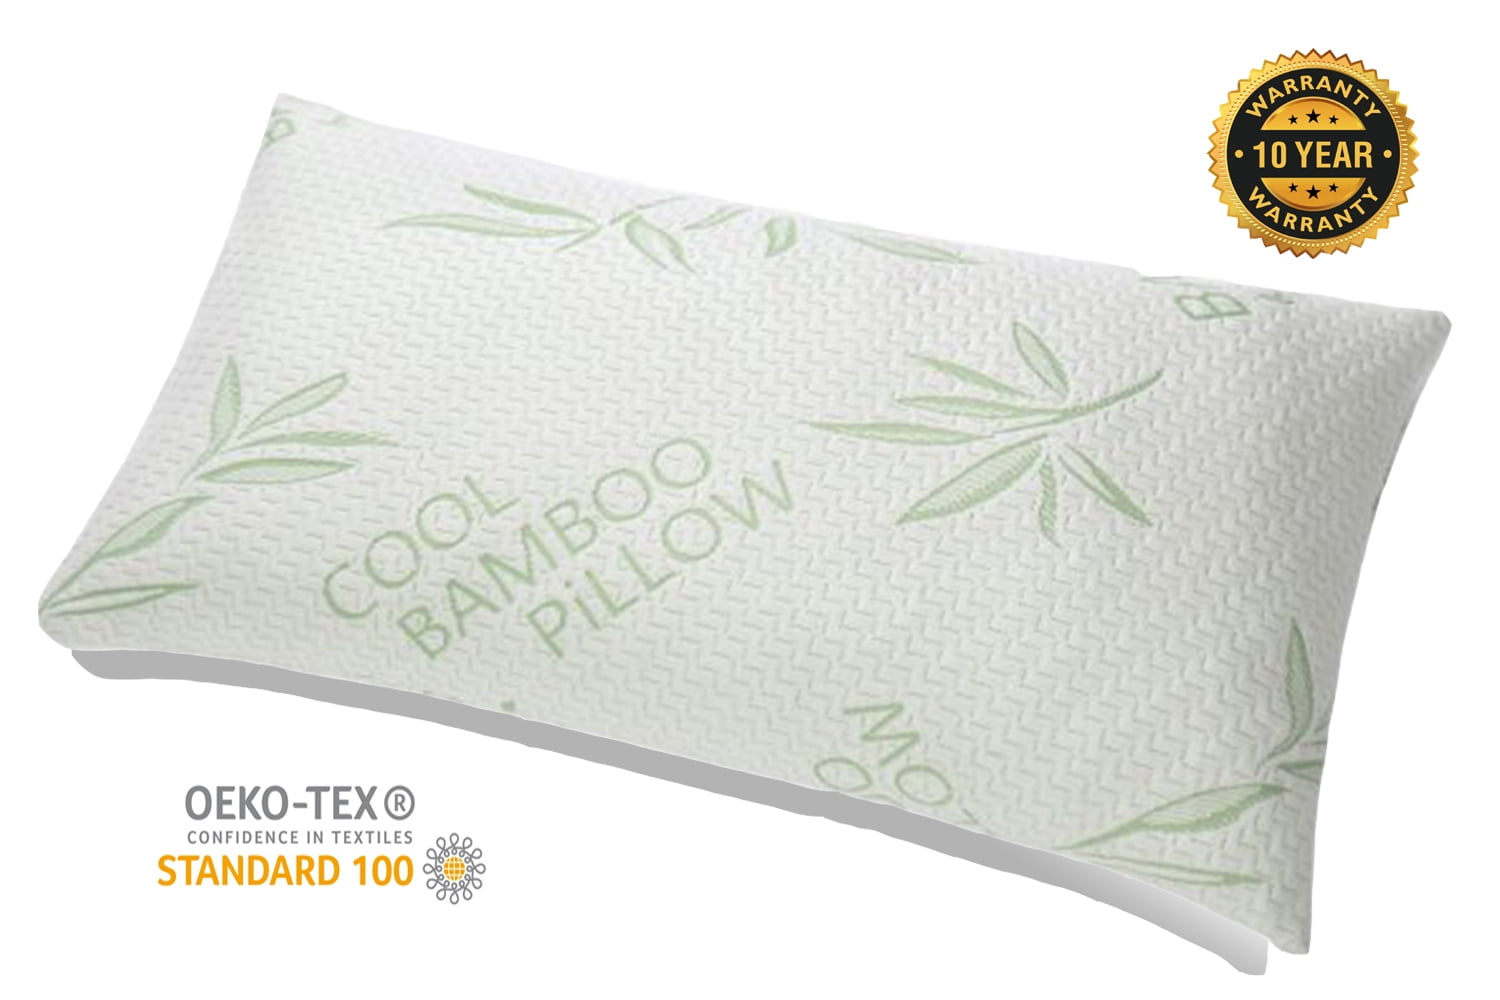 Plixio Contour Pillow with Bamboo Cover Orthopedic Memory Foam Comfort Support 